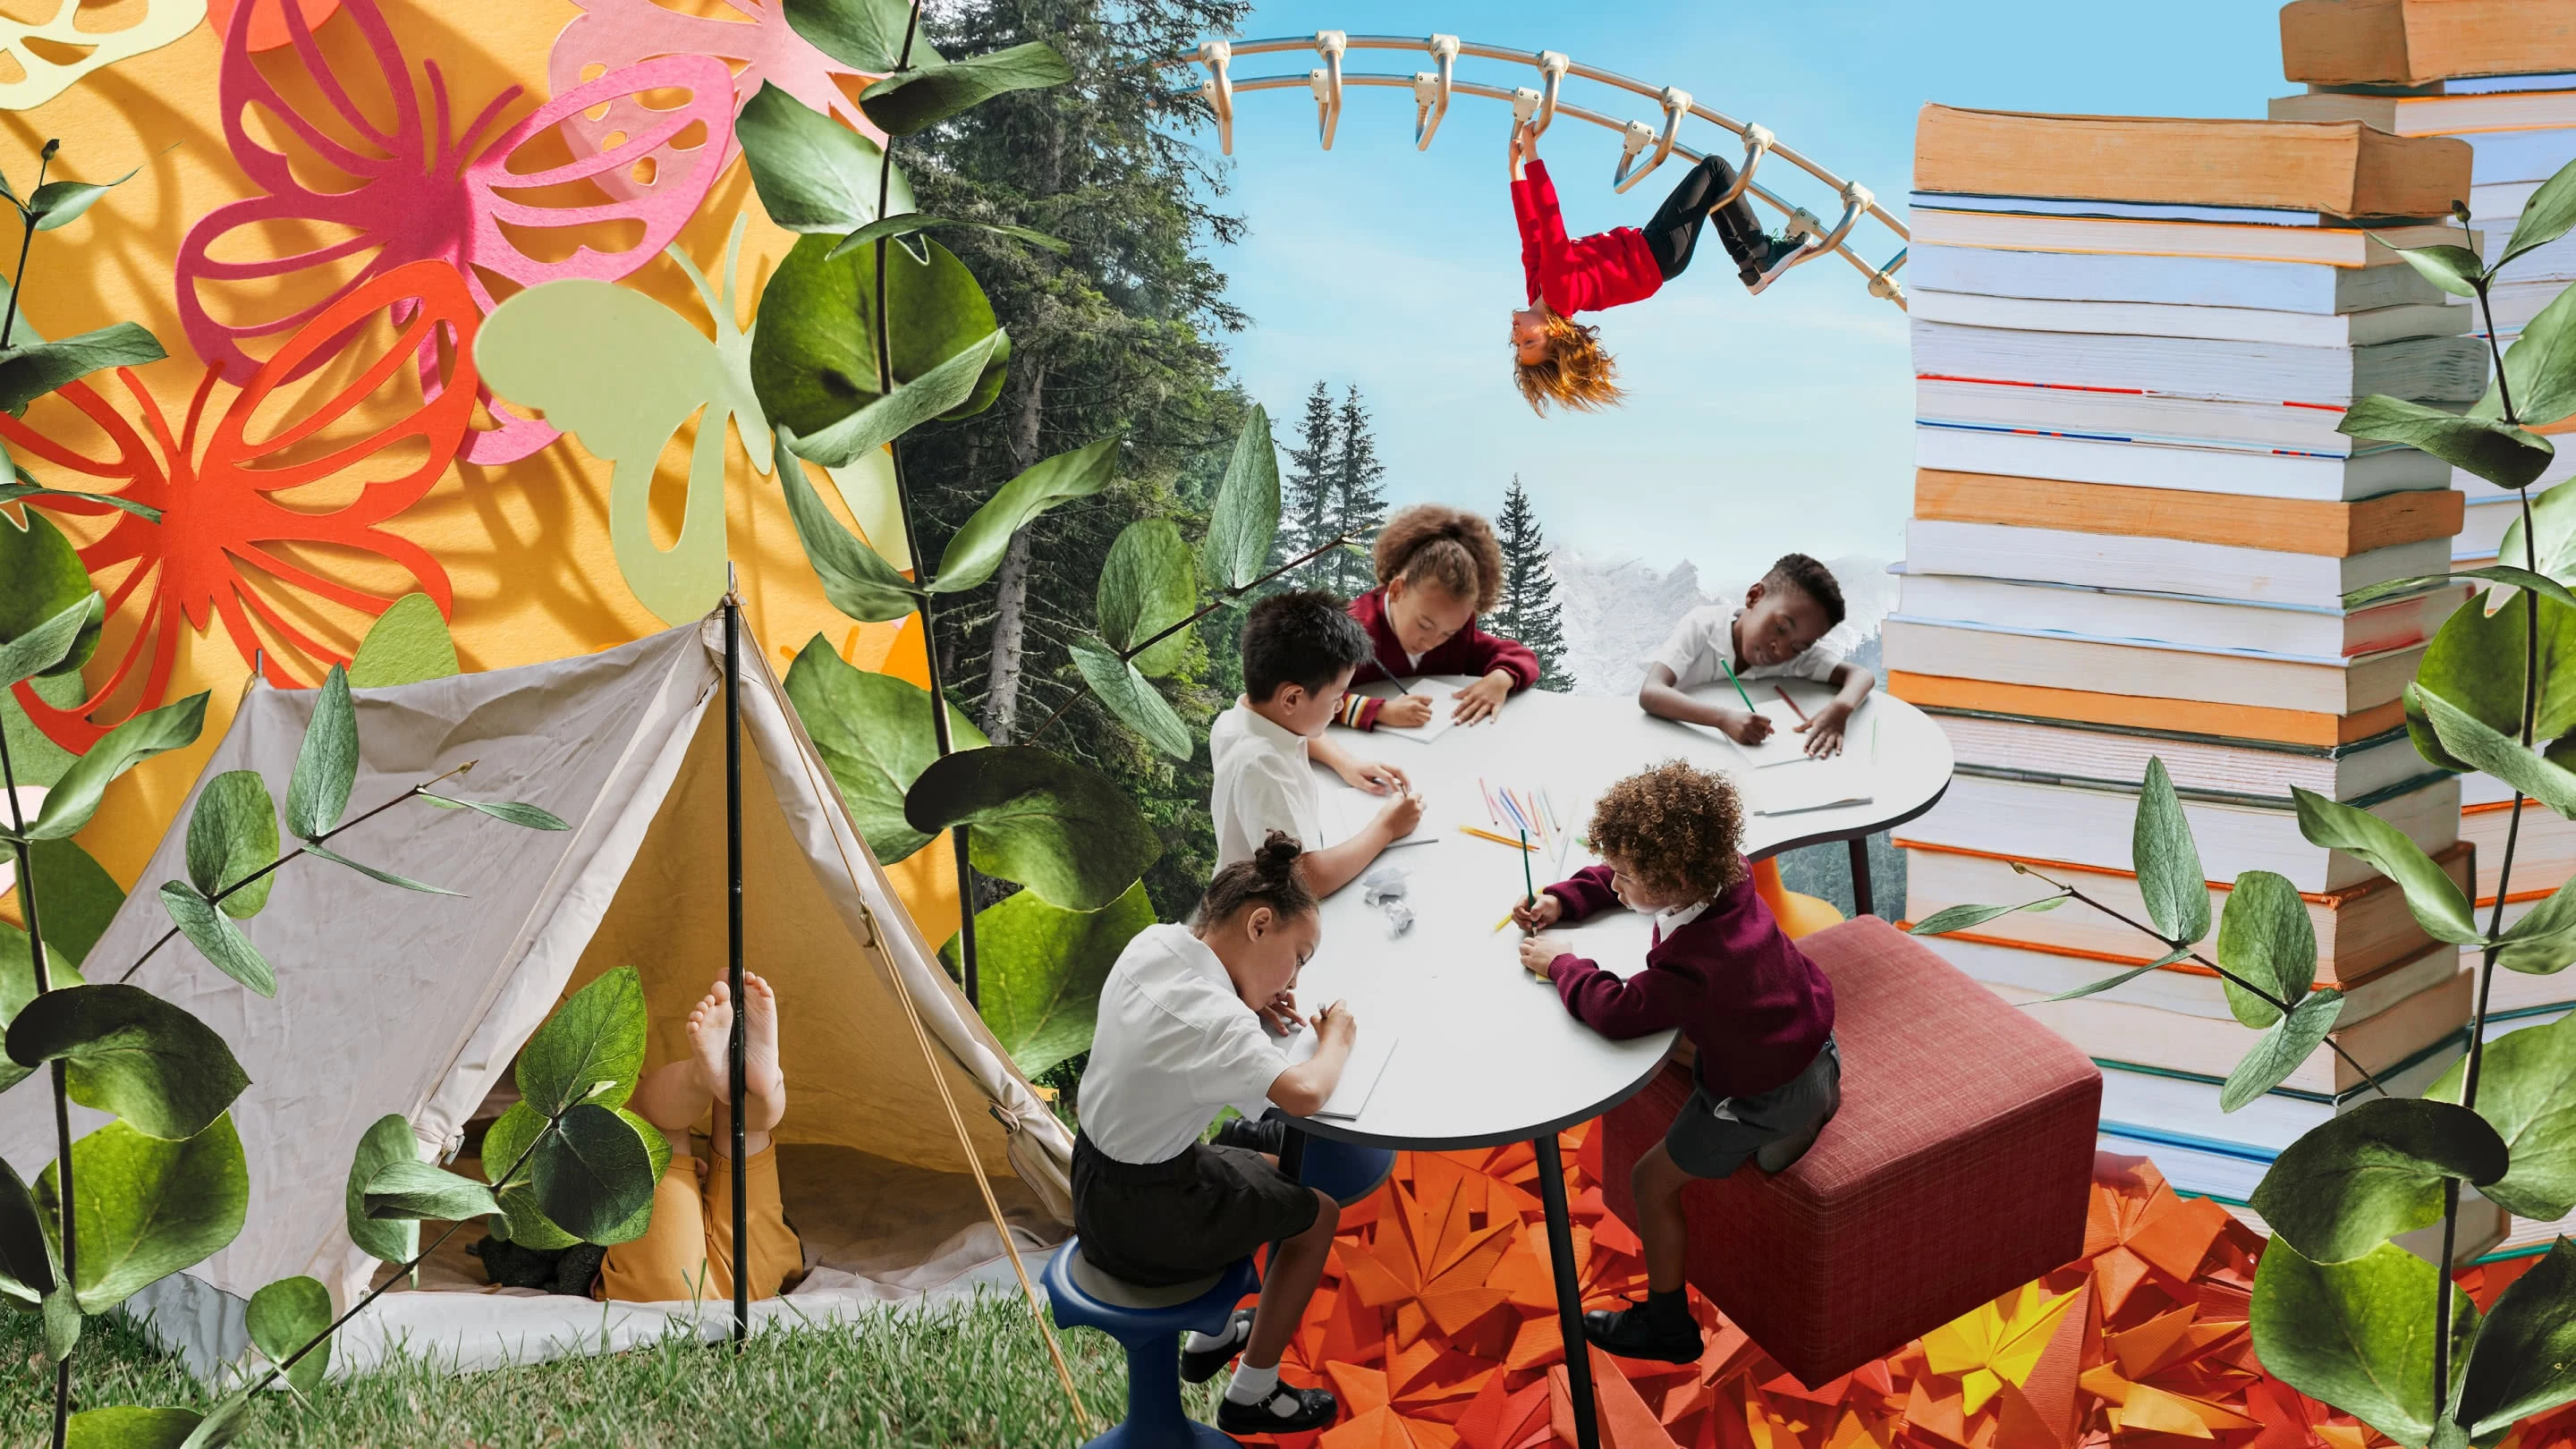 Colour classroom-themed collage. Primary-school-aged children of different skin tones are writing at a curvy table in the centre, surrounded by a large stack of books on the right and a large butterfly and tent on the left. A child playing on monkey bars is in the background. 